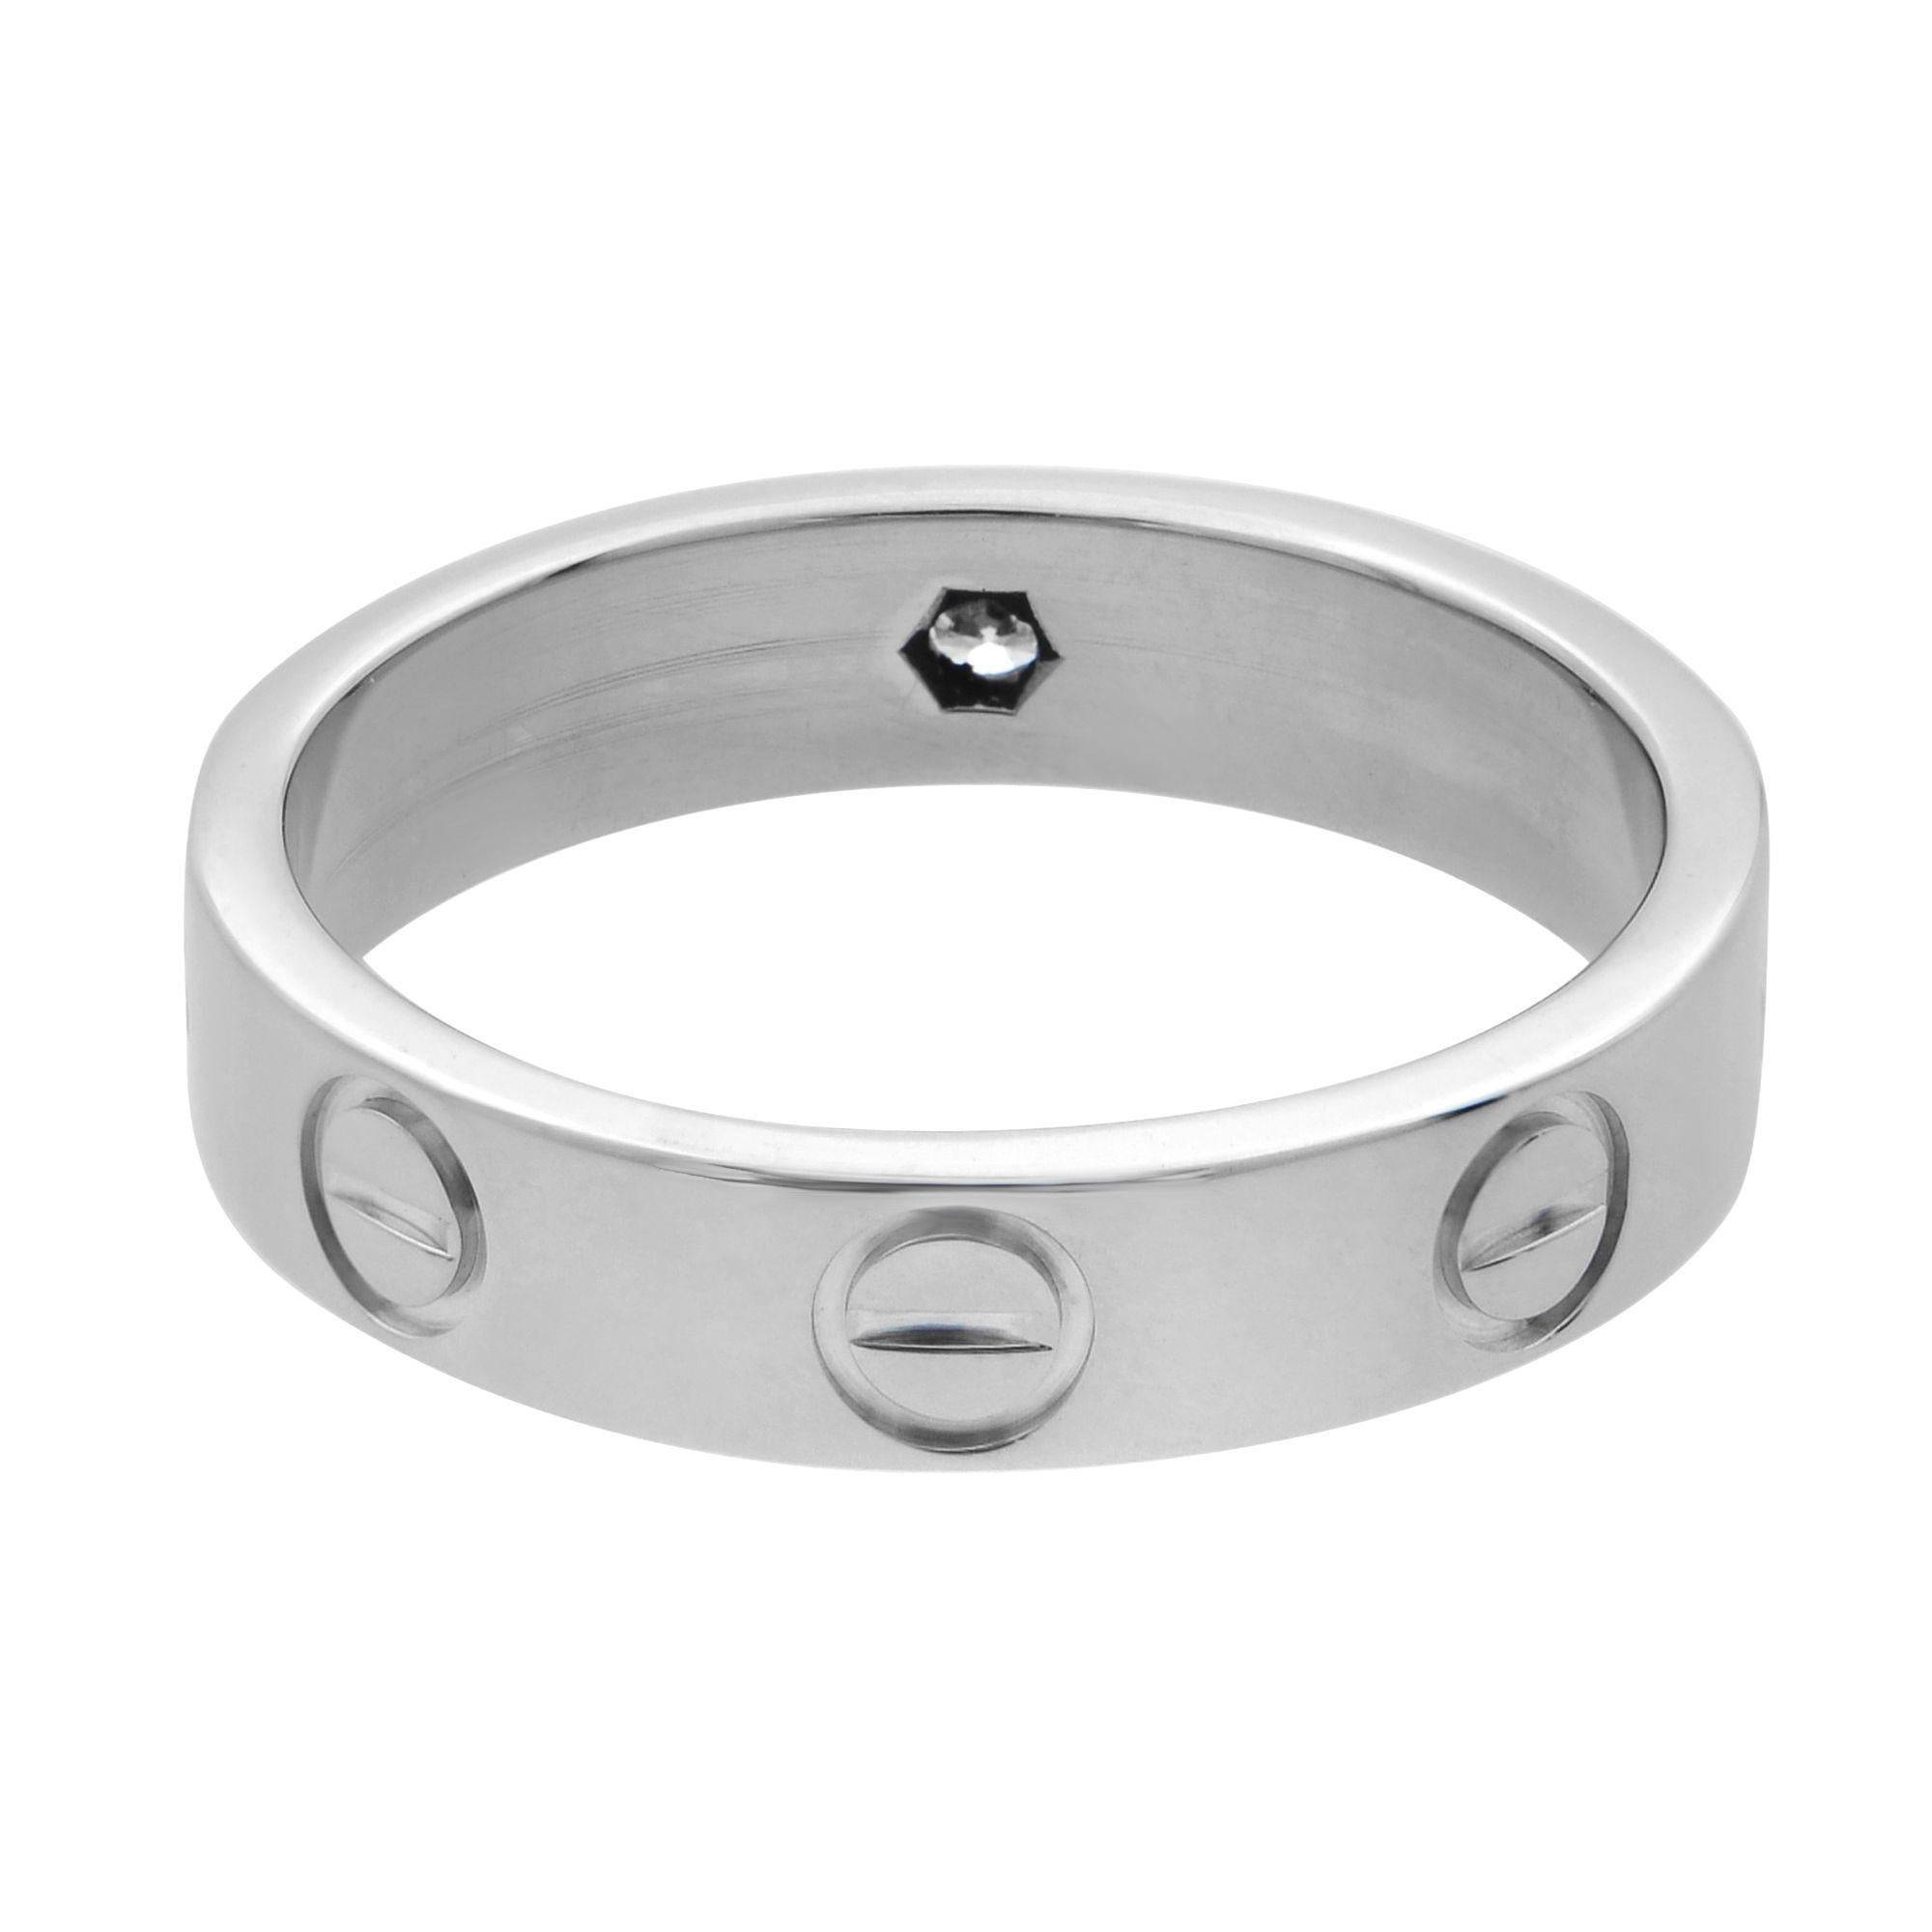 cartier 750 50 ring